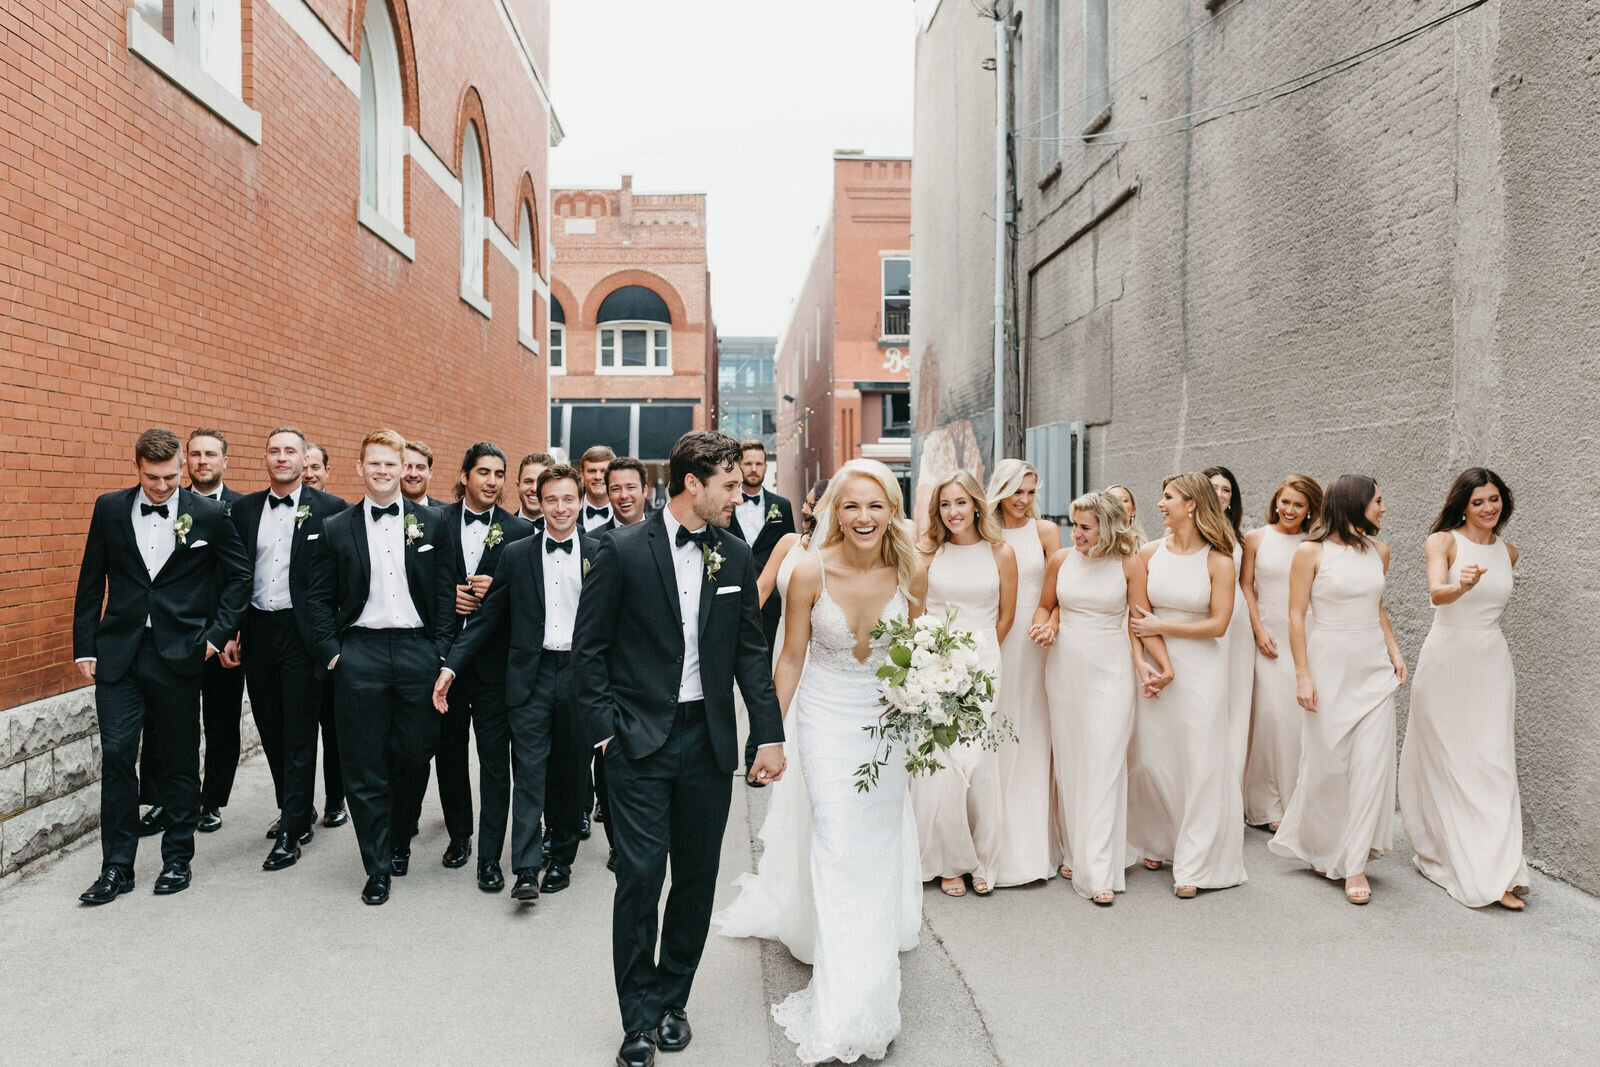 Bring your vision for your big day to life with the perfect rental for your groom & groomsmen in STL.